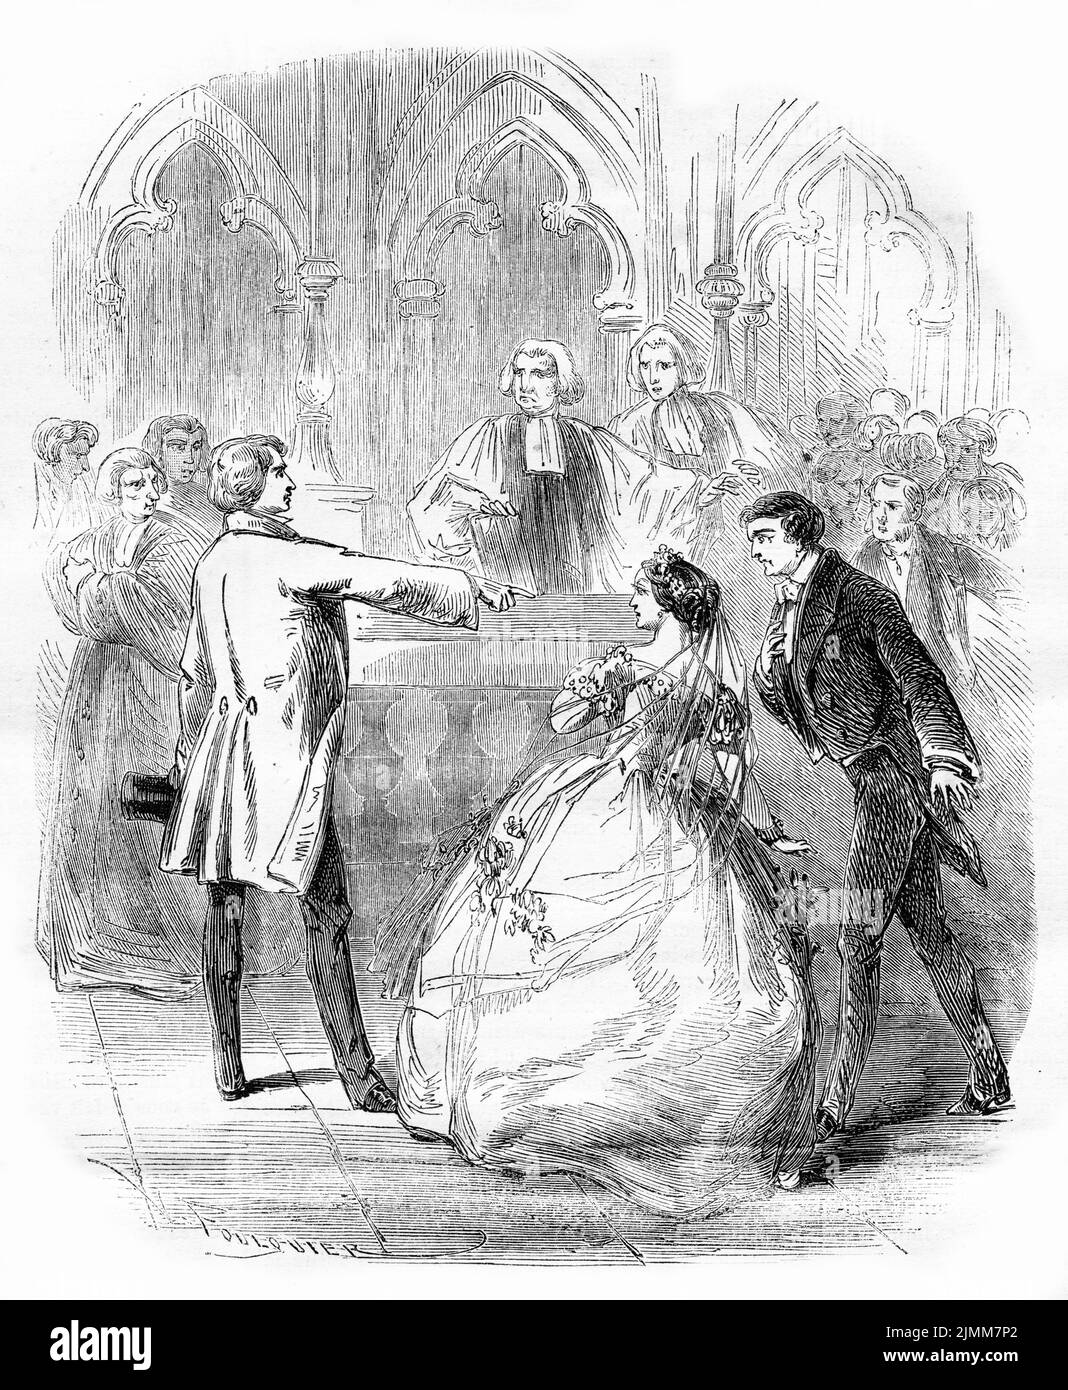 Illustration from the French magazine Journal Pour Tous (newspaper for all) in 1856, showing a man objecting to a couple getting married Stock Photo